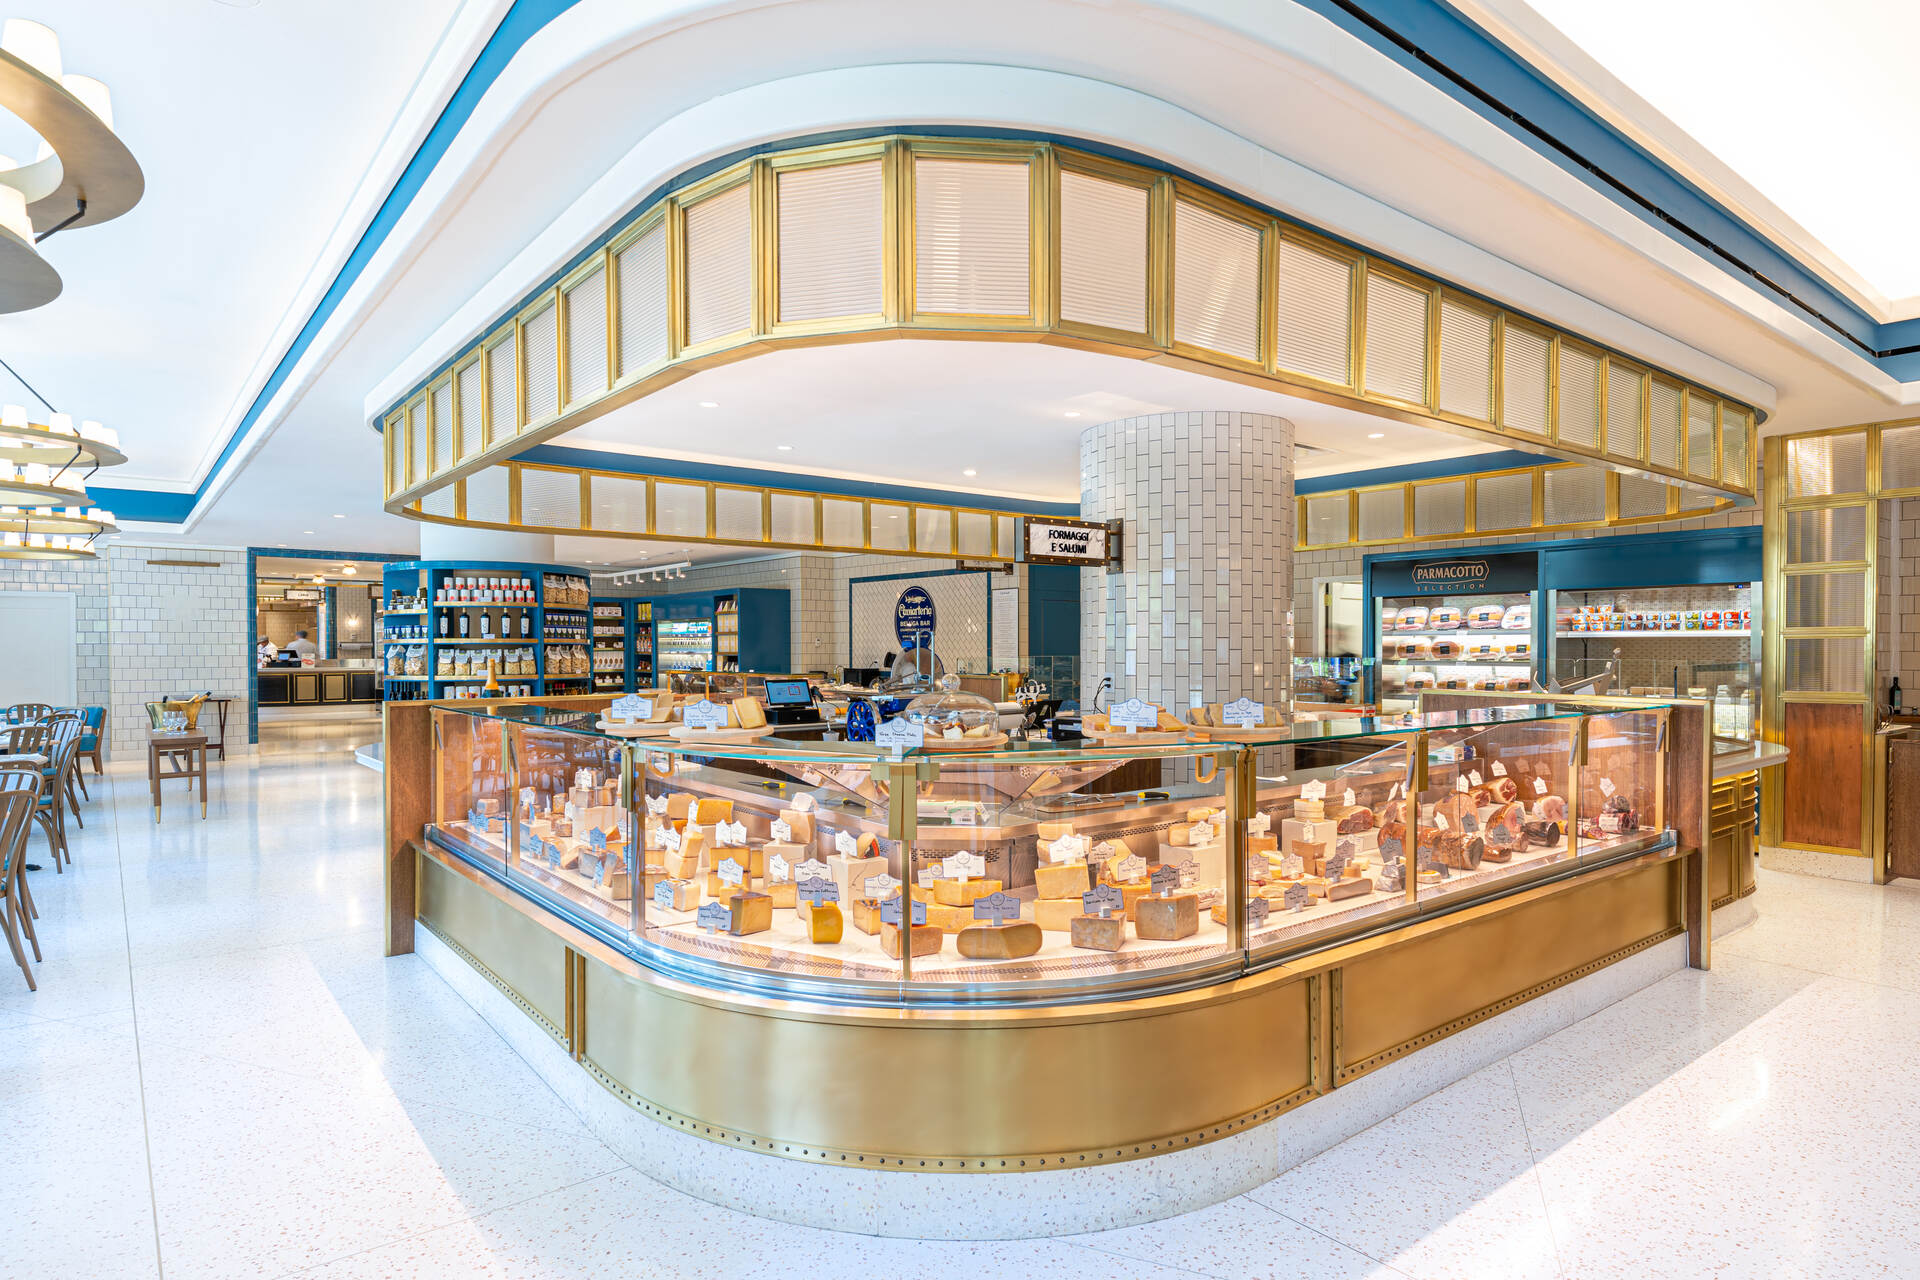 A spacious and brightly lit bakery with a modern and sleek design, featuring a large glass display case filled with an array of freshly baked goods and a cozy seating area in the background.